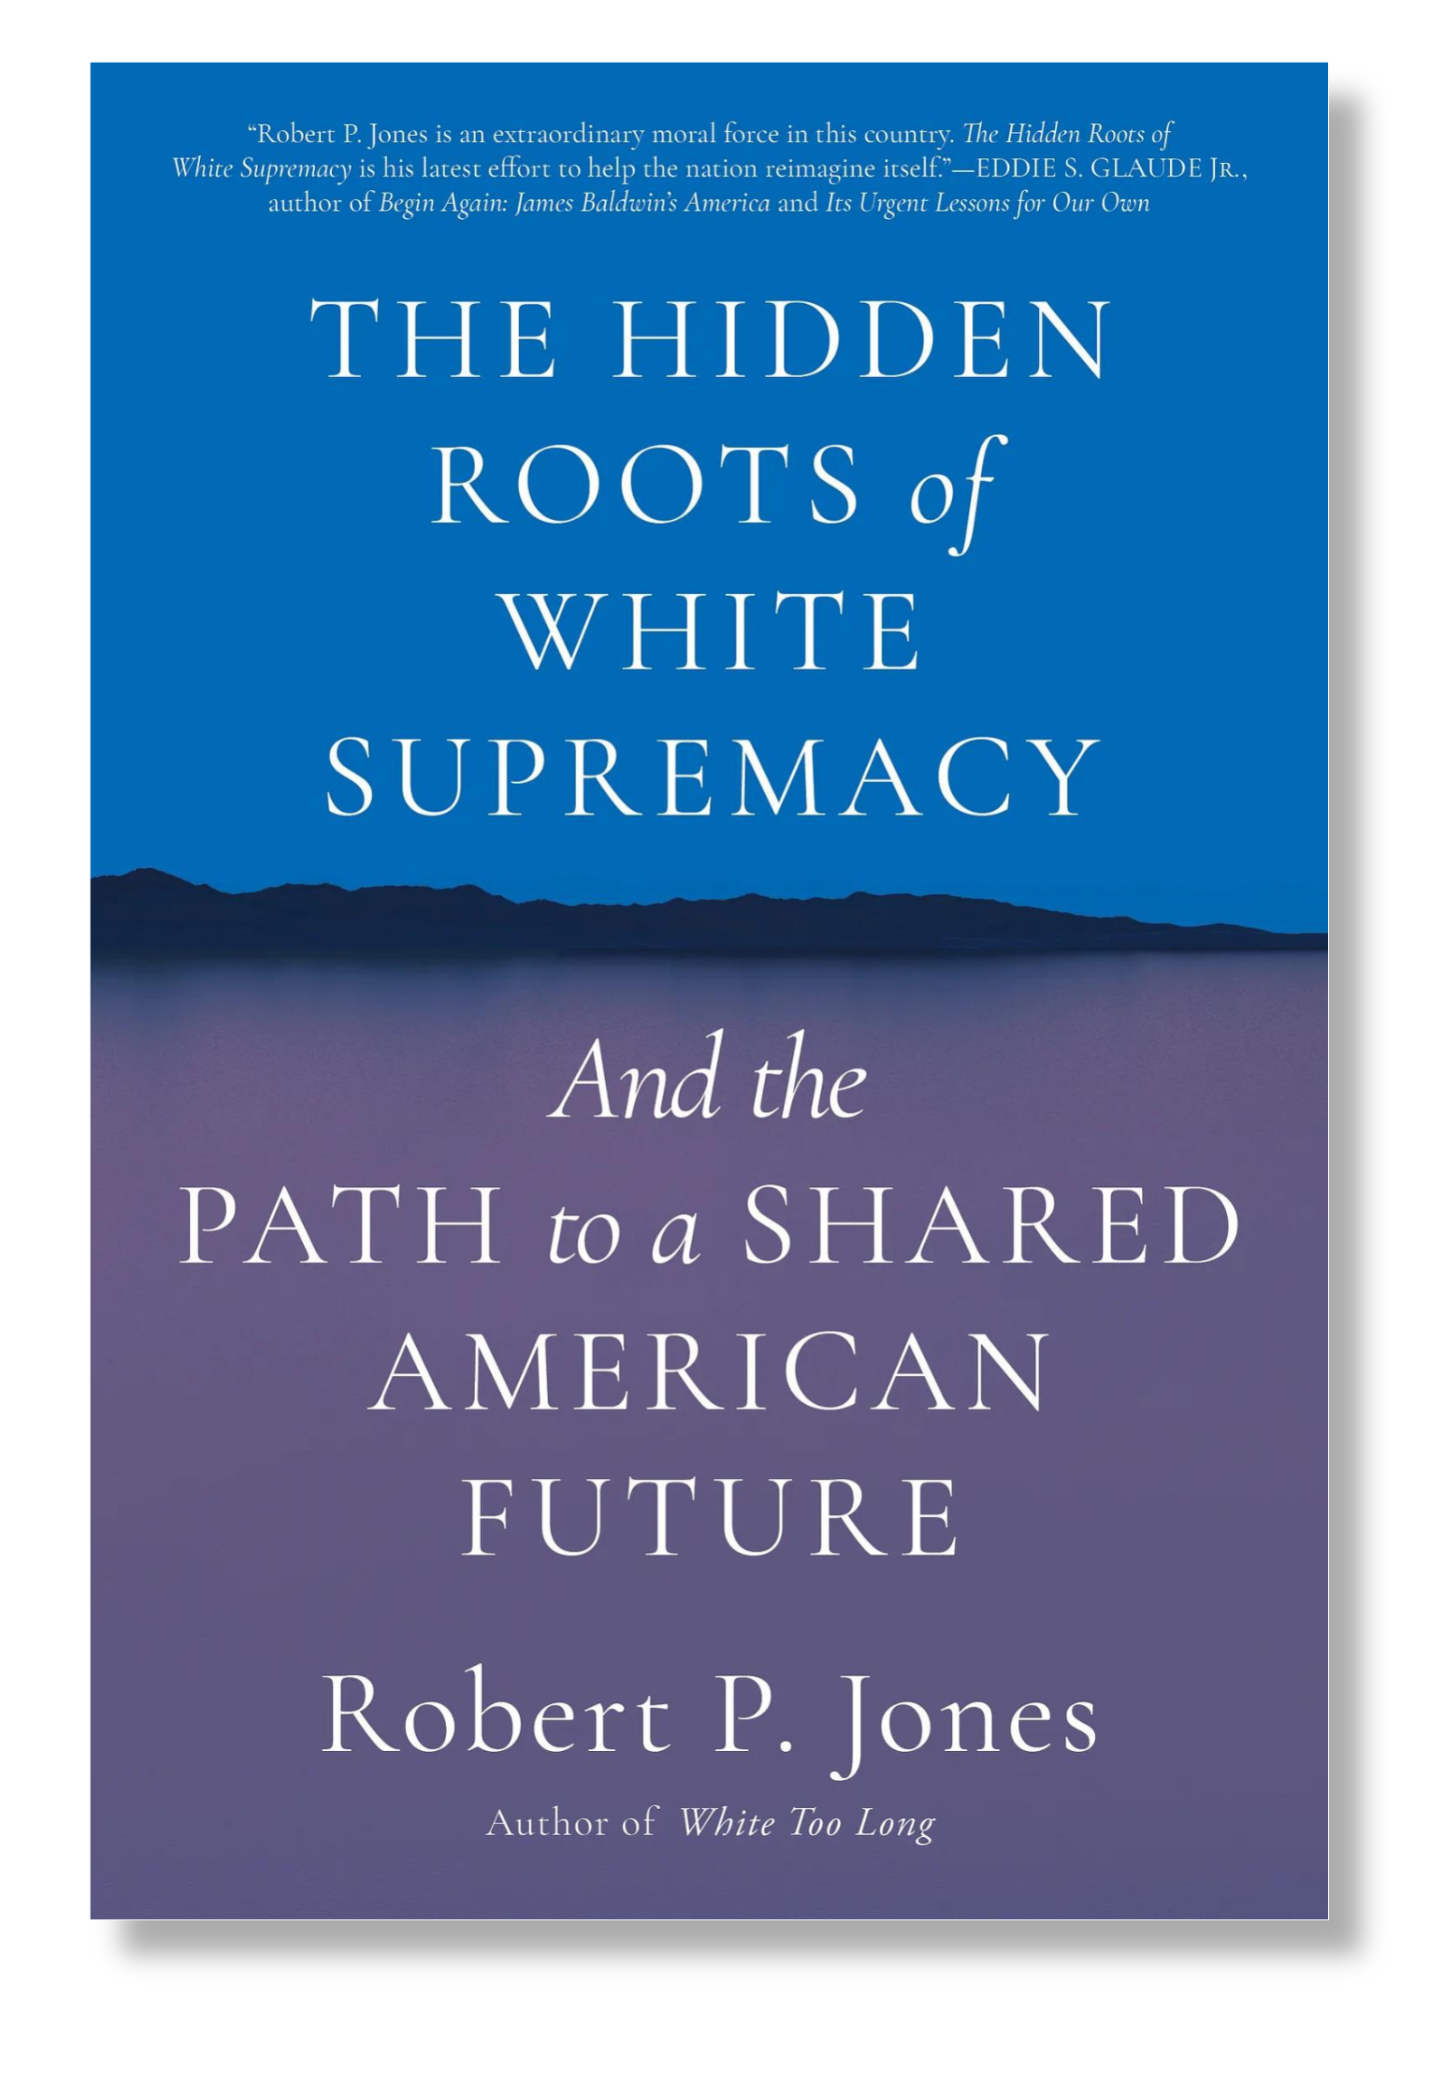 Book cover reads: The Hidden Roots of White Supremacy: And the Path to a Shared American Future by Robert P. Jones, Author of White Too Long. Cover is blue and purple with white text